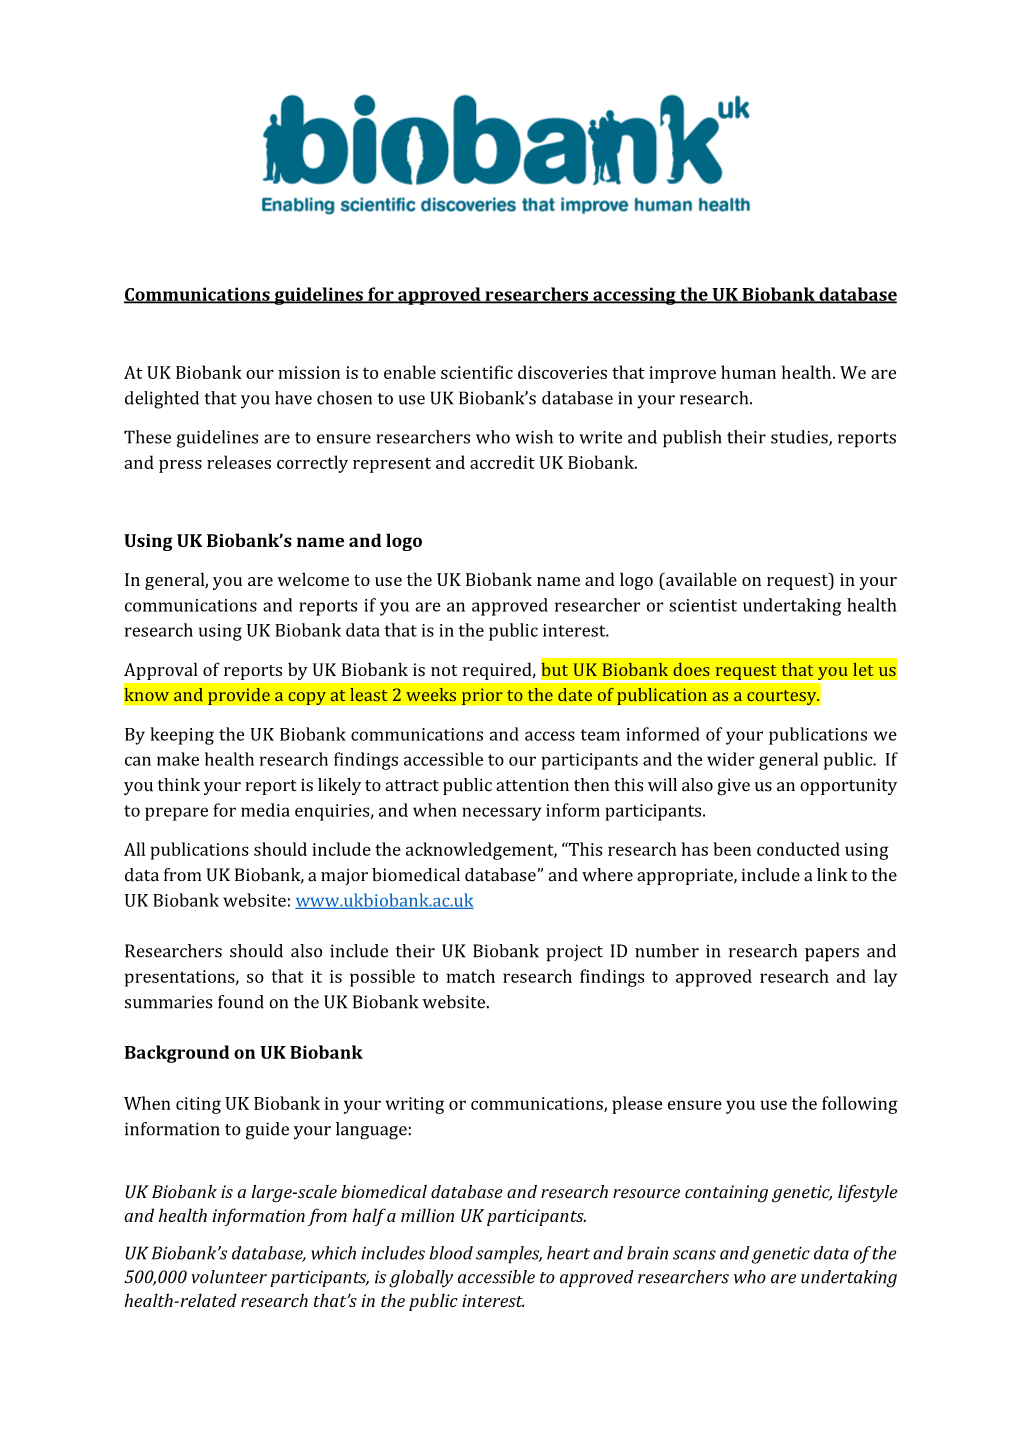 Communications Guidelines for Approved Researchers Accessing the UK Biobank Database